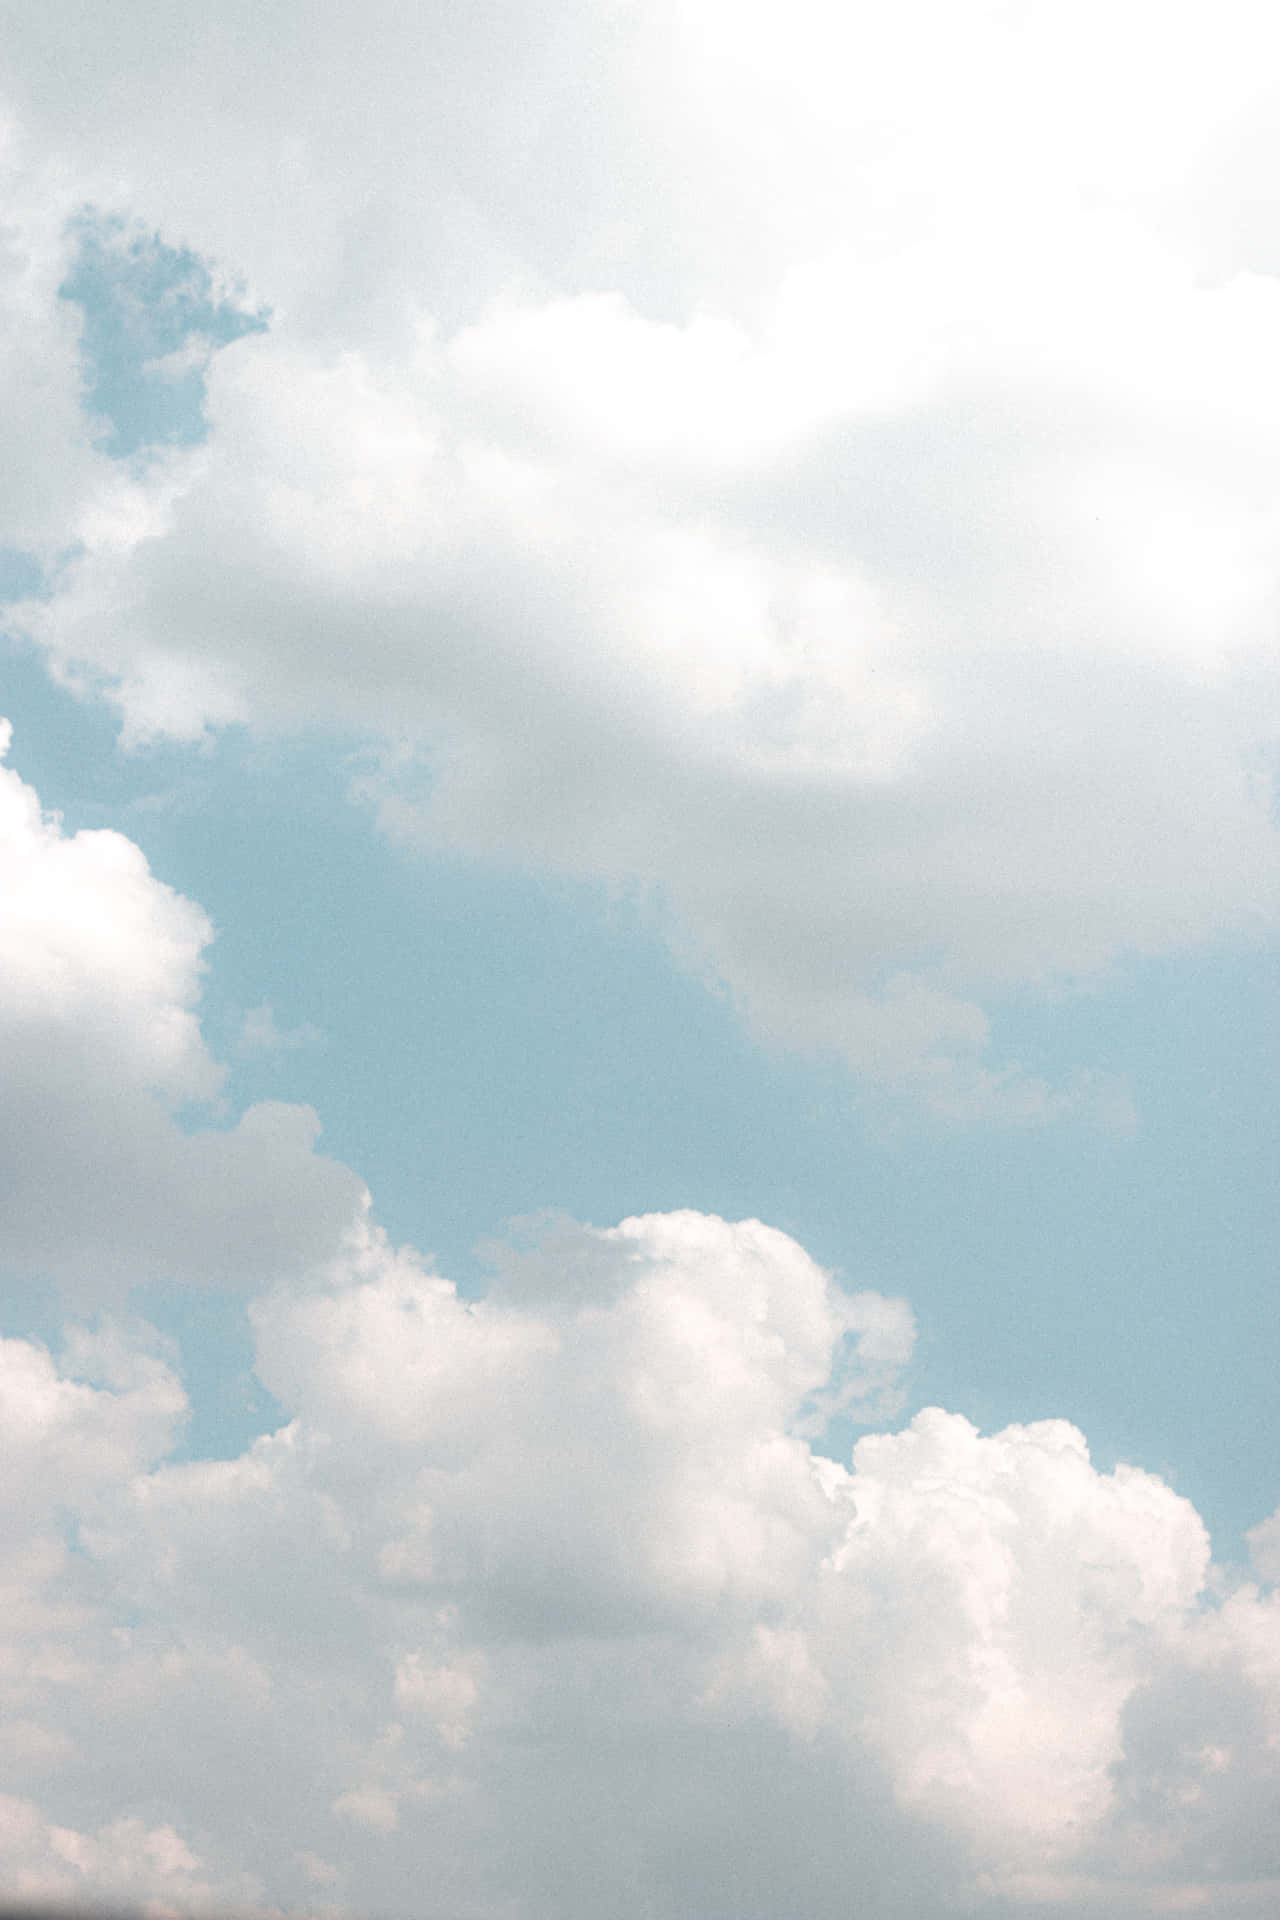 “A beautiful view of tranquil white clouds in the bright blue sky” Wallpaper